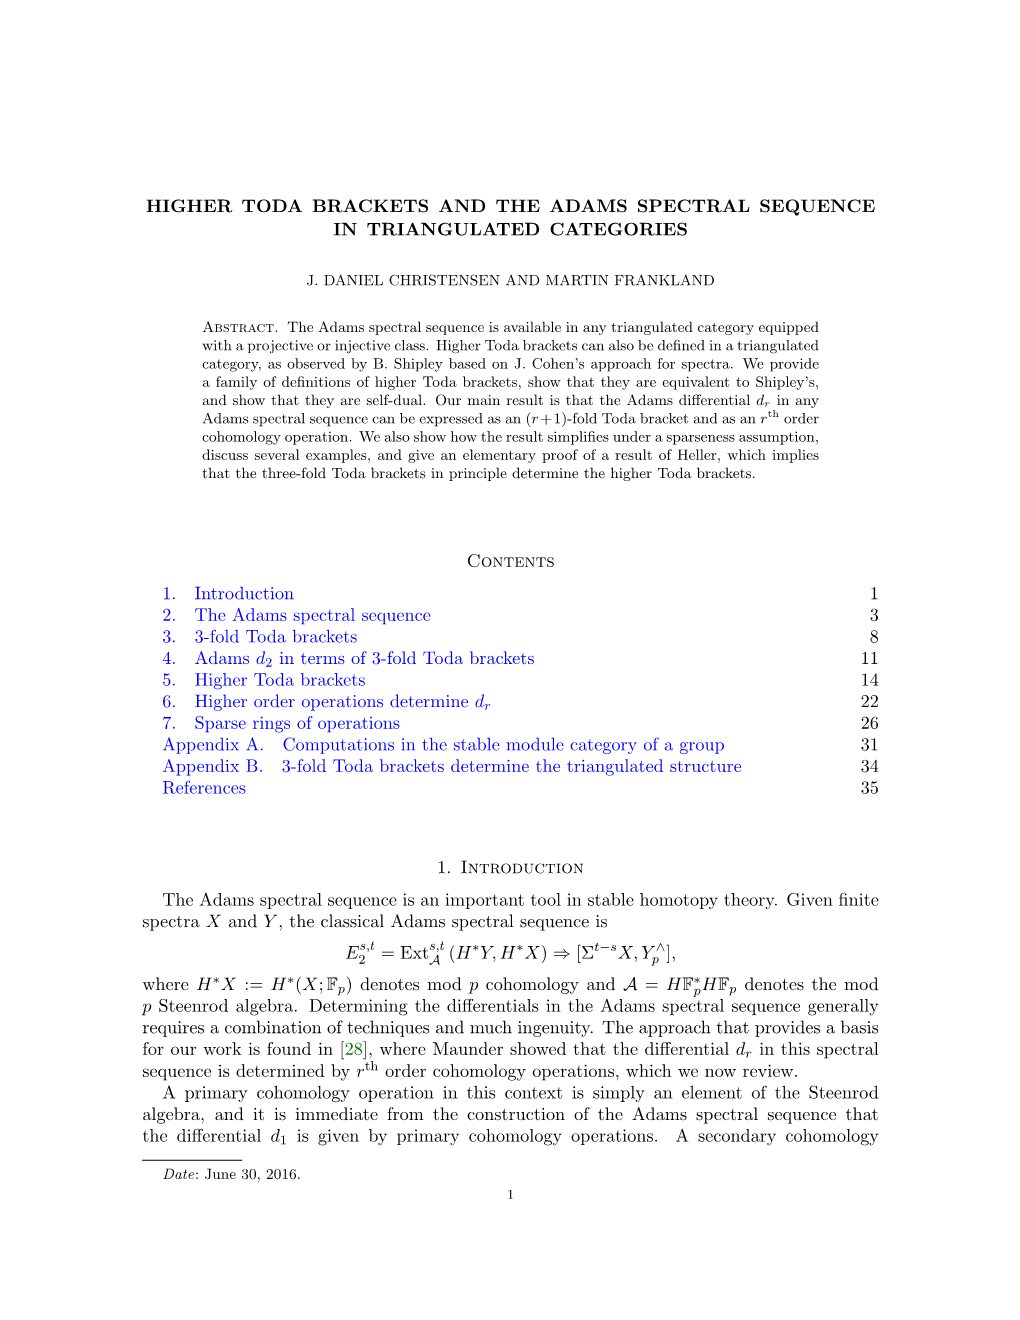 Higher Toda Brackets and the Adams Spectral Sequence in Triangulated Categories